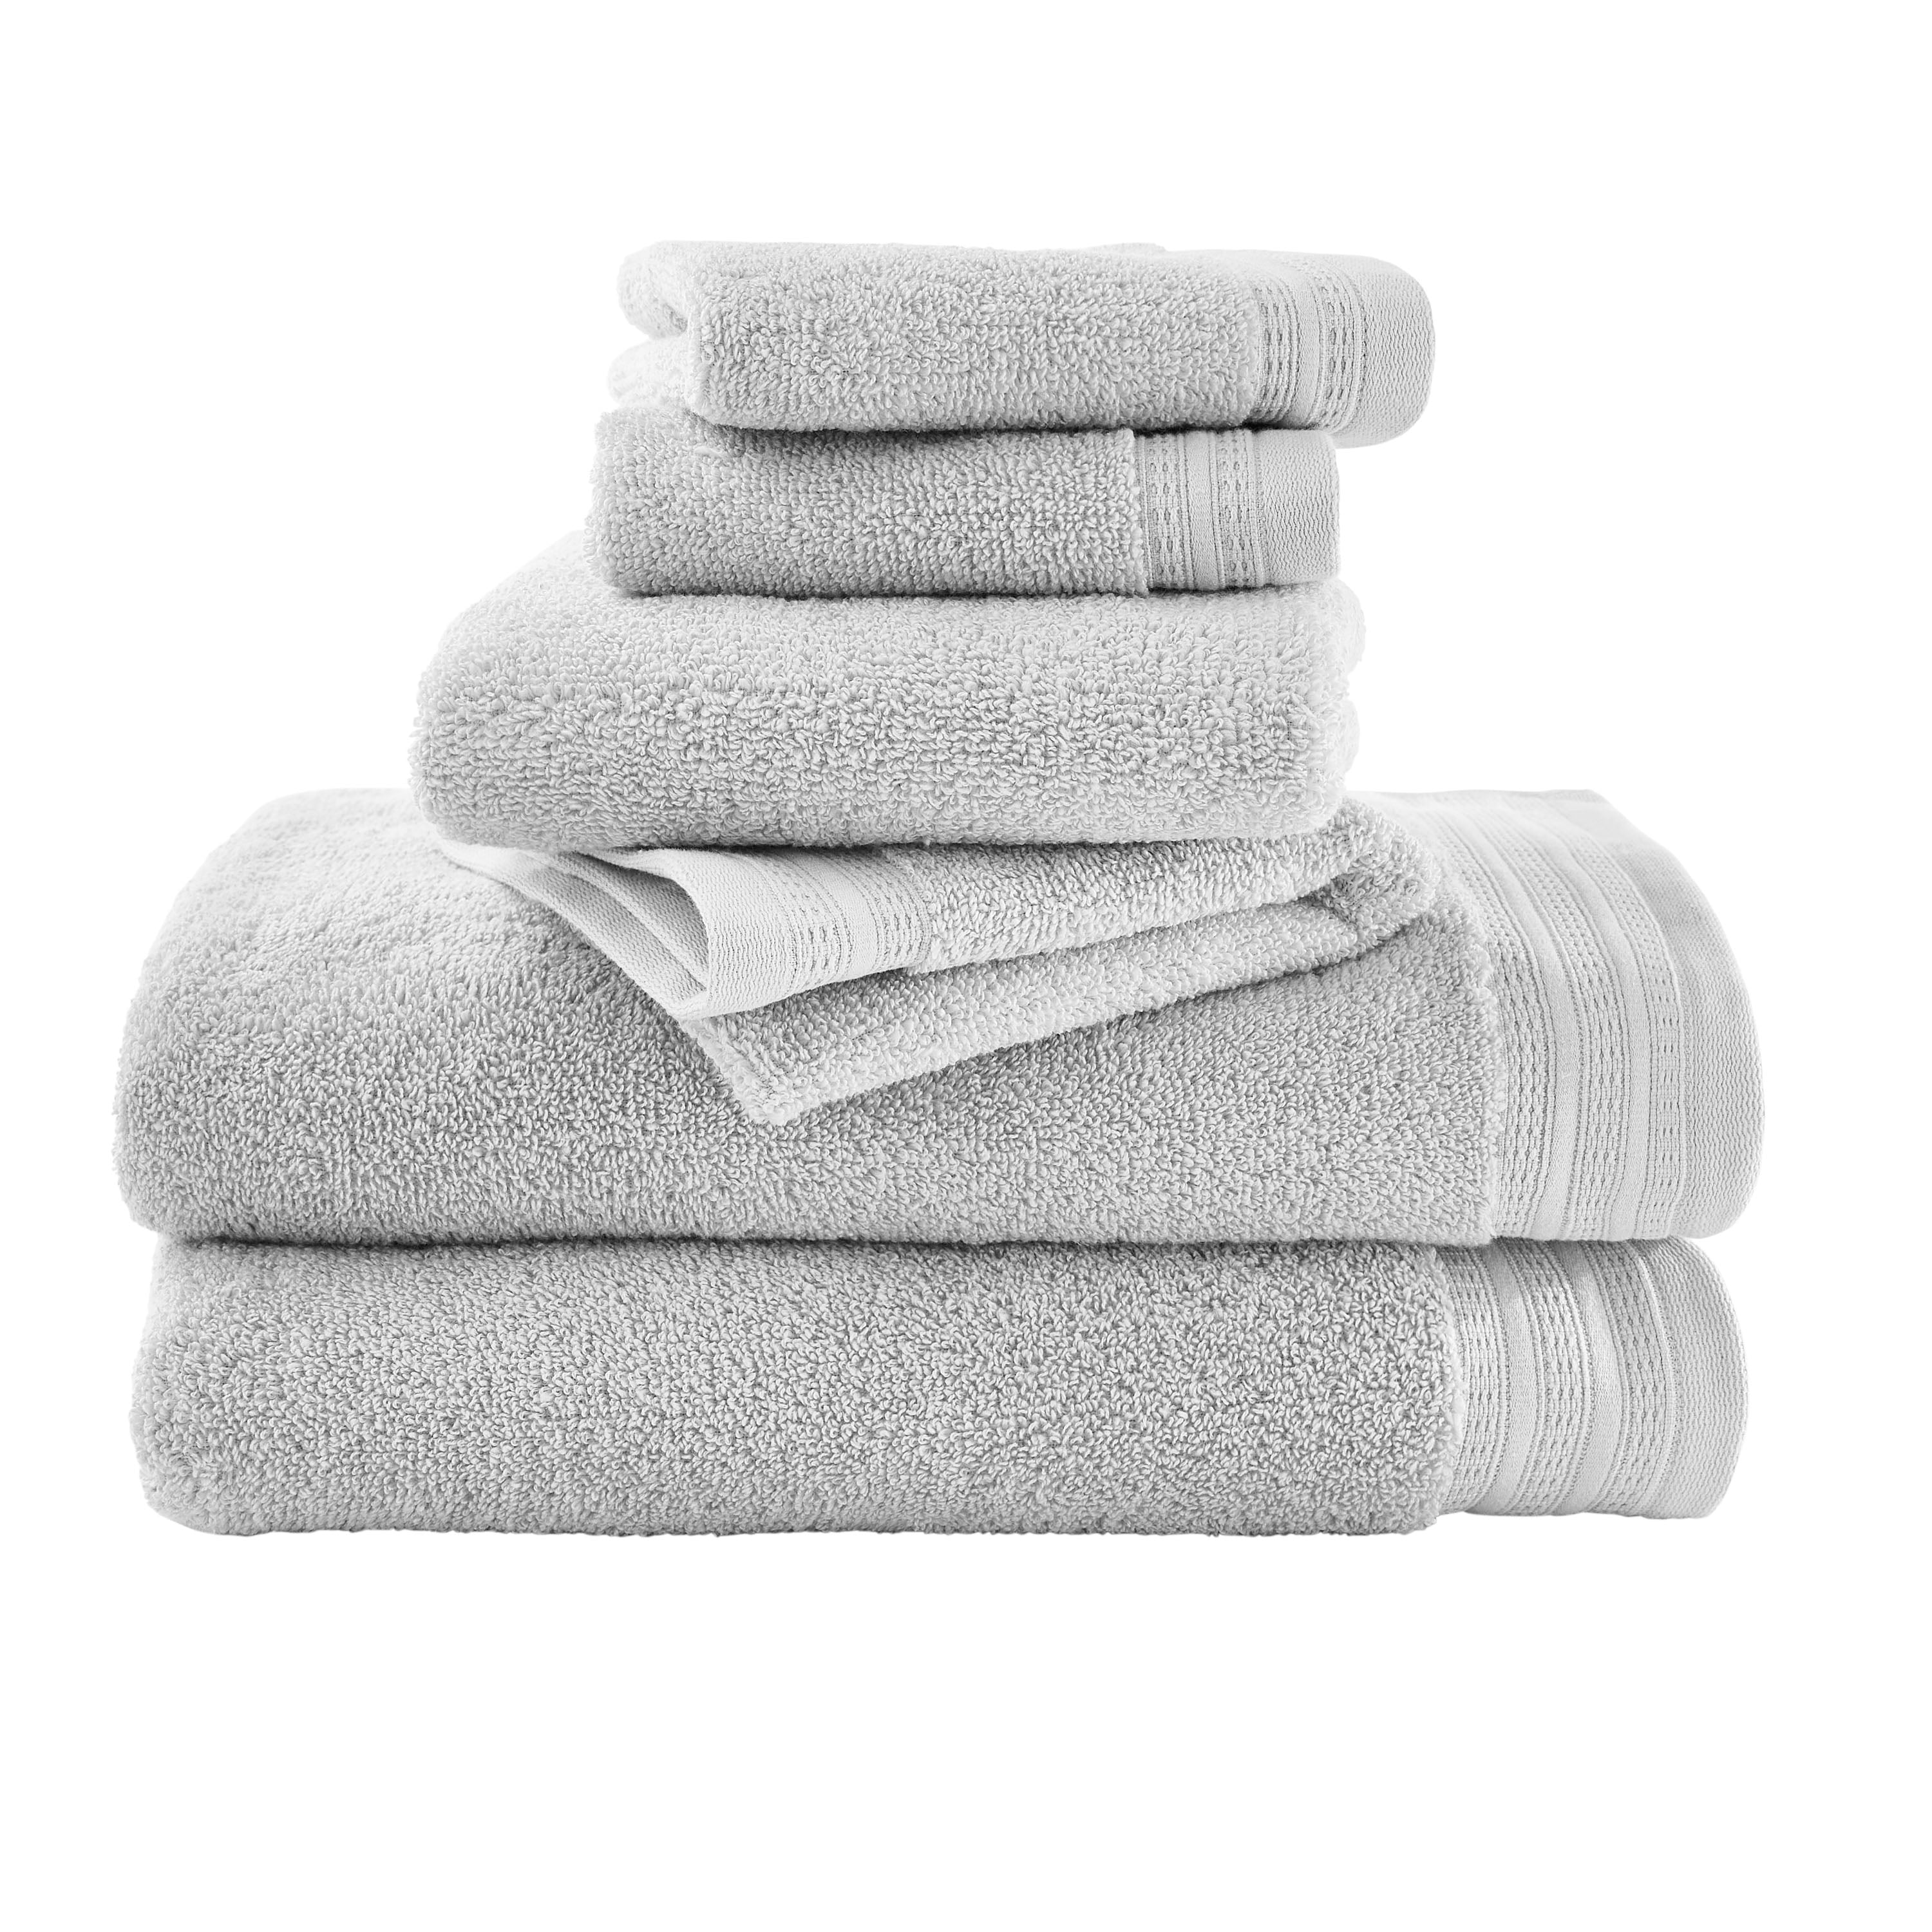 Classic Hotel Towels, 6 Pack Terry Washcloths – The Everplush Company